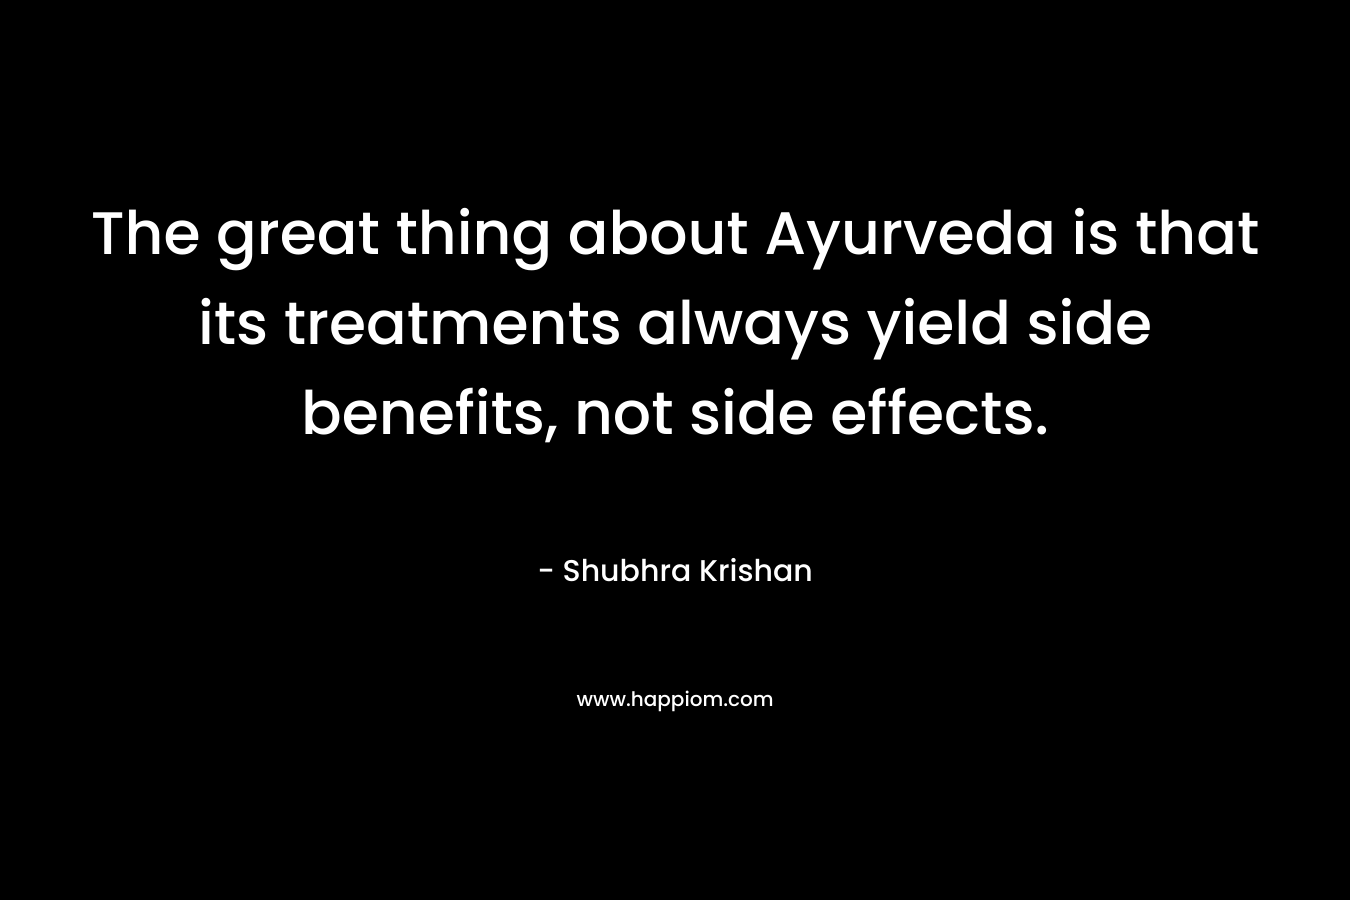 The great thing about Ayurveda is that its treatments always yield side benefits, not side effects.